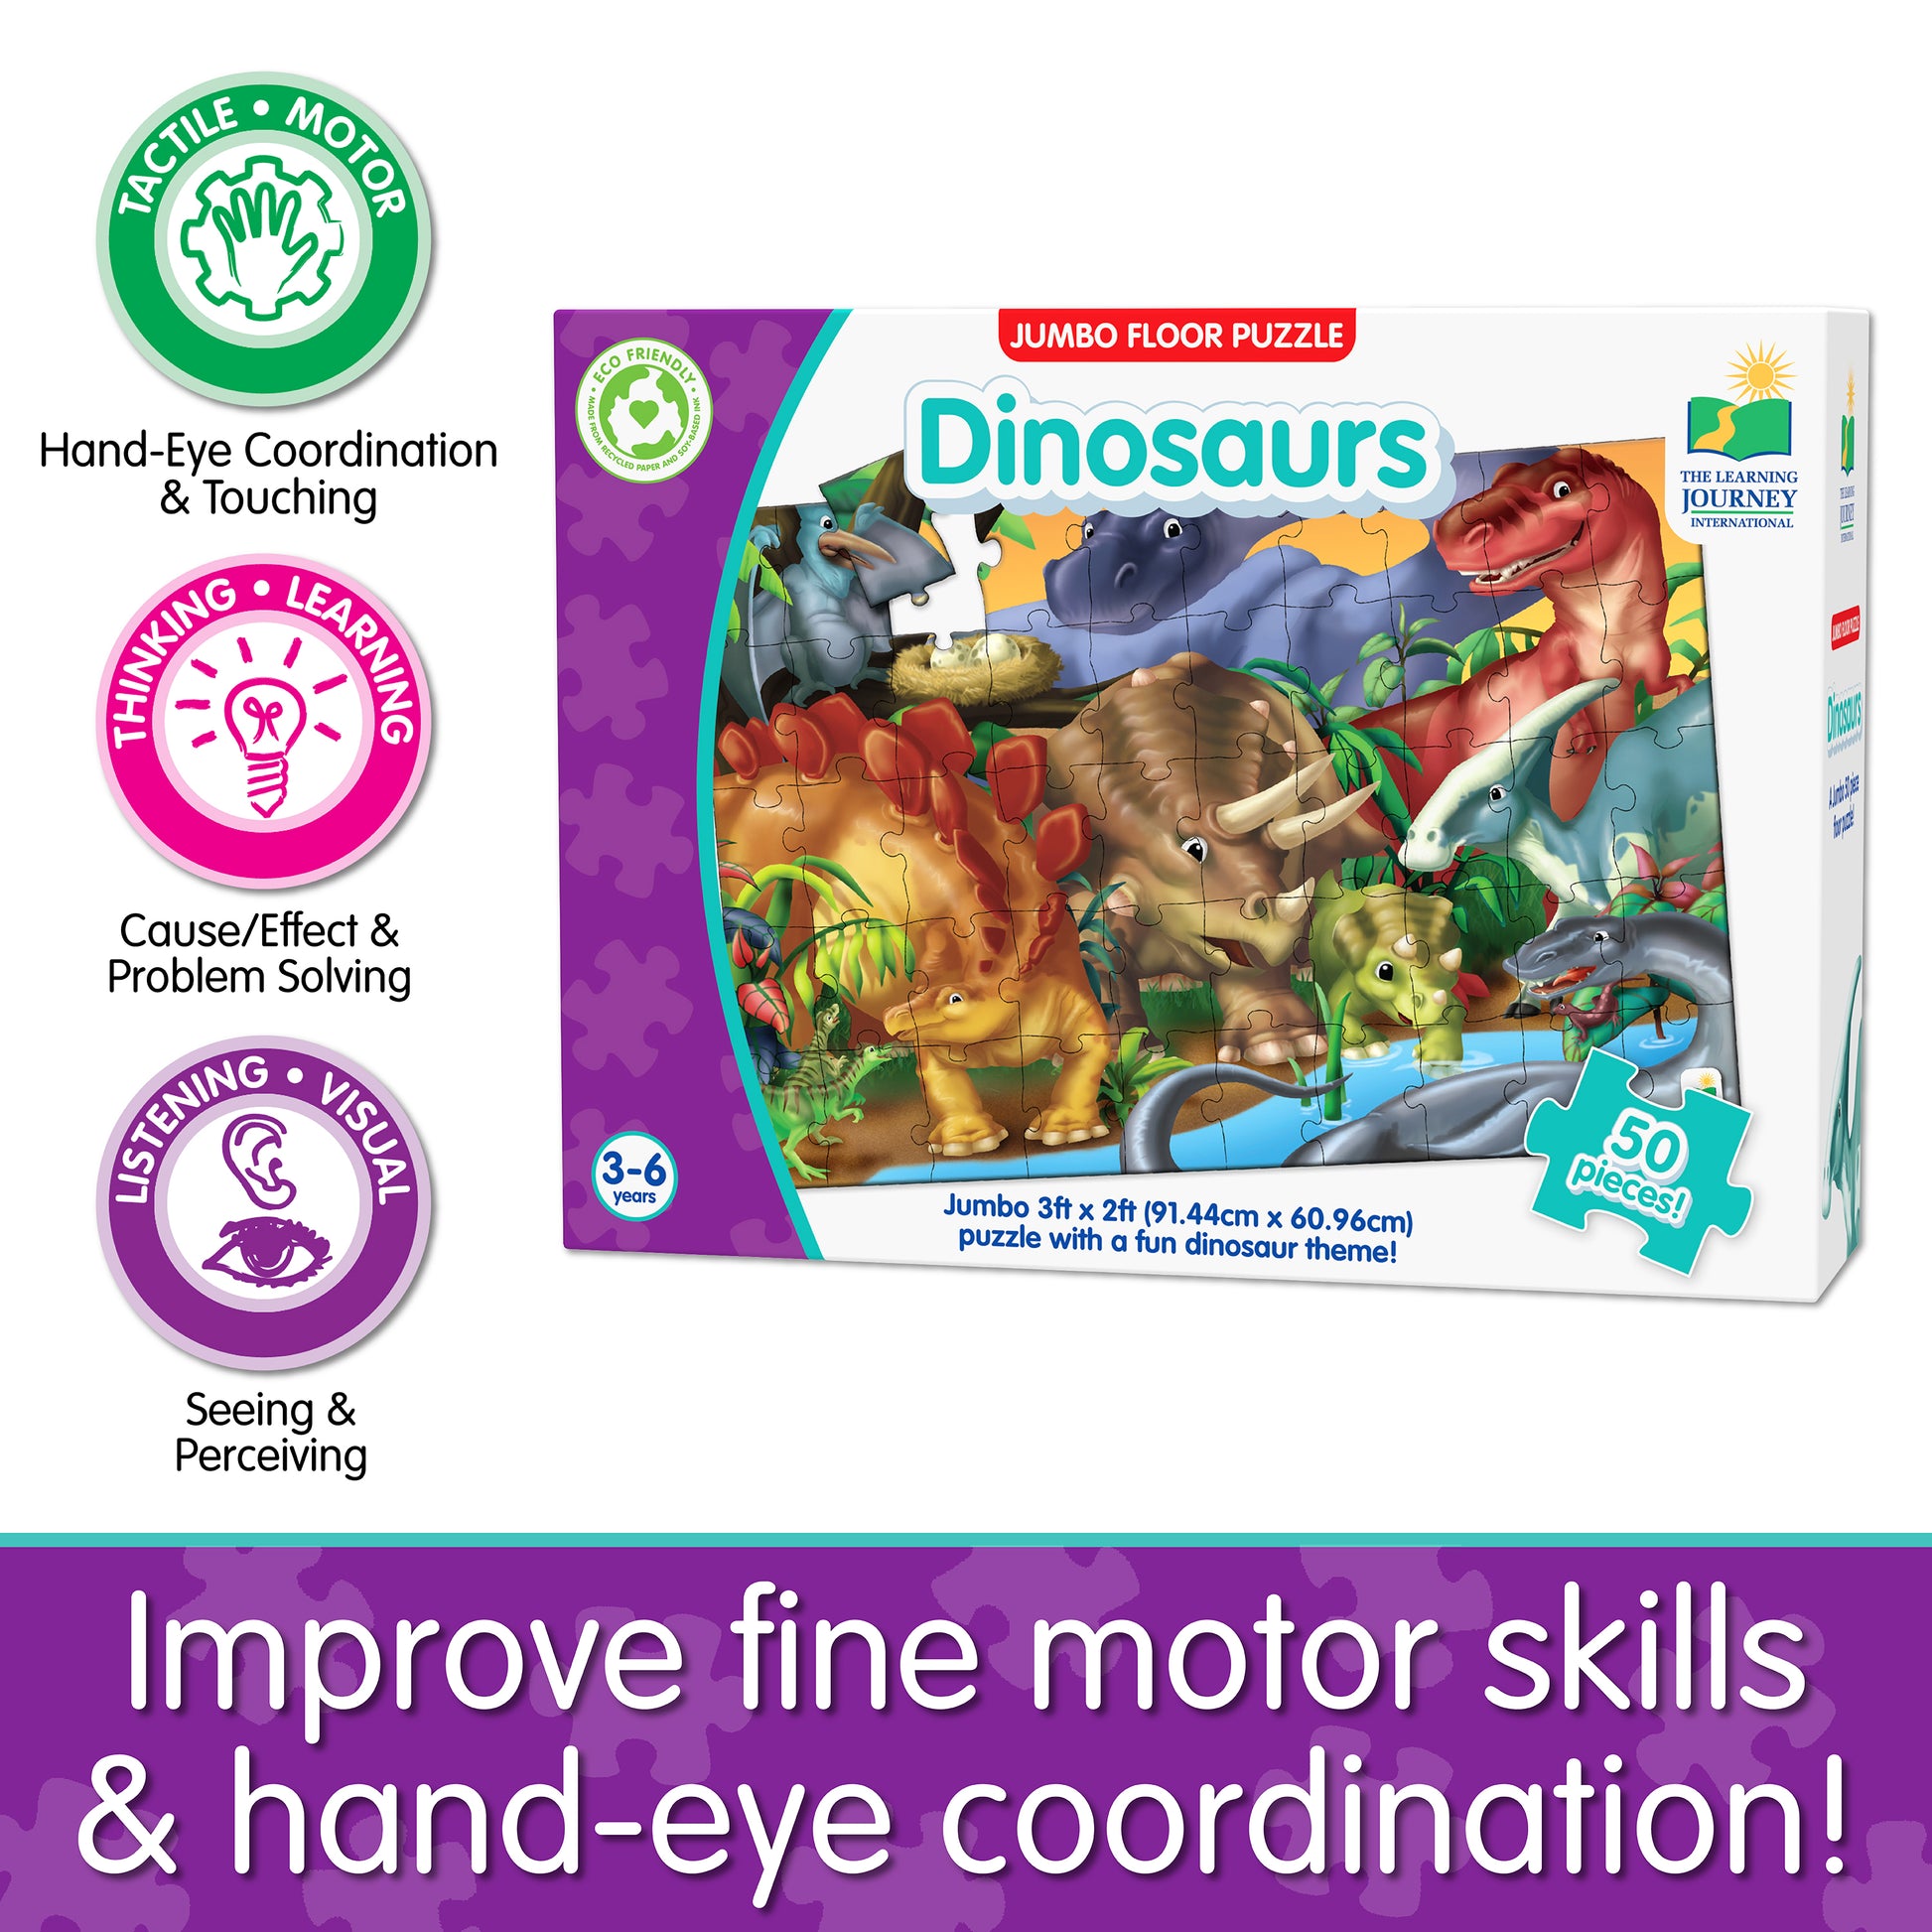 Infographic of Jumbo Floor Puzzle - Dinosaurs' educational benefits that reads, "Improve fine motor skills and hand-eye coordination!"